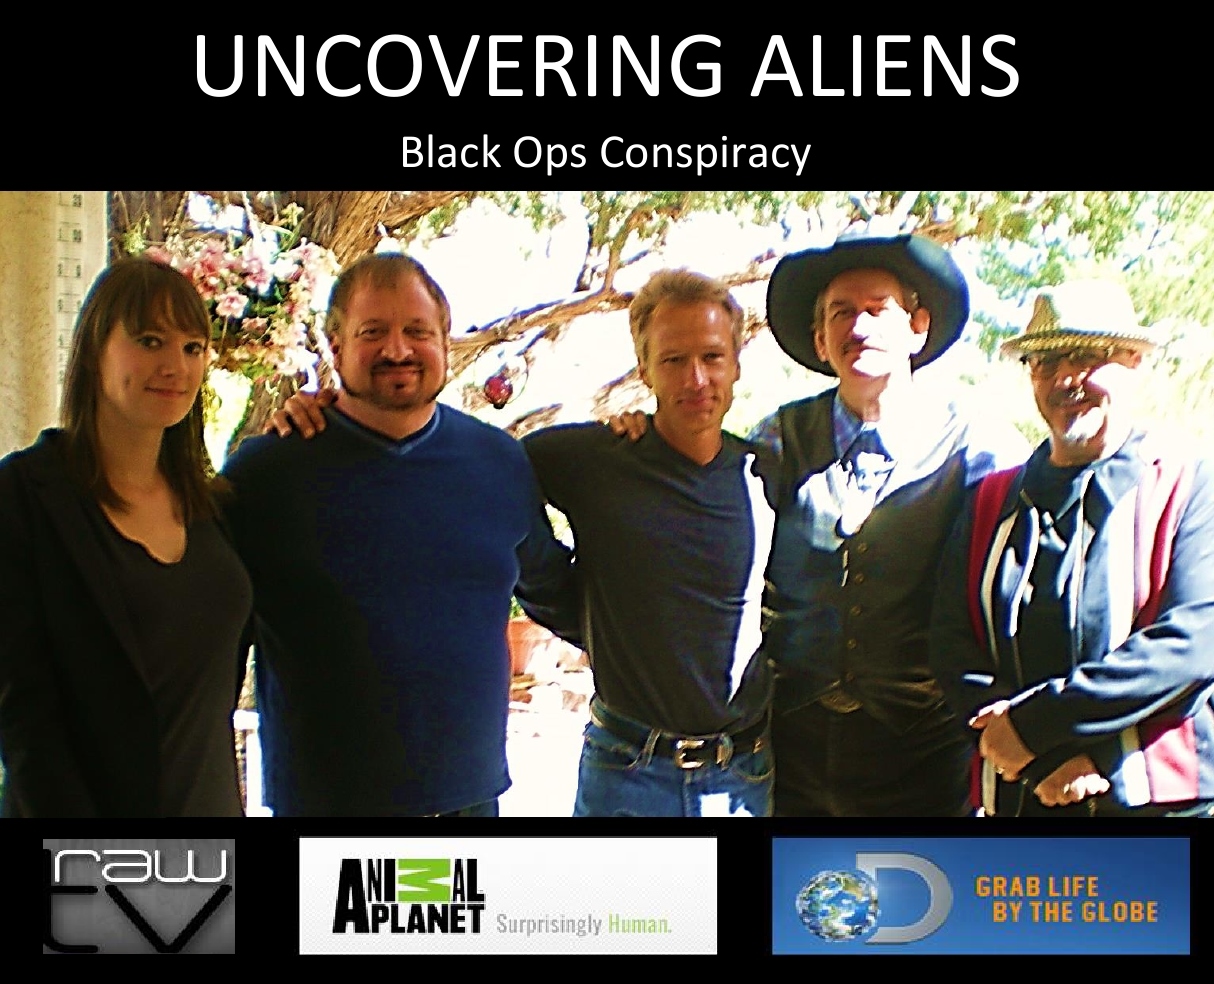 Uncovering Aliens - Black Ops Conspiracy; George Pilgrim with Maureen Elsberry, Mike Bara, Derrel Sims, and Steven Jones